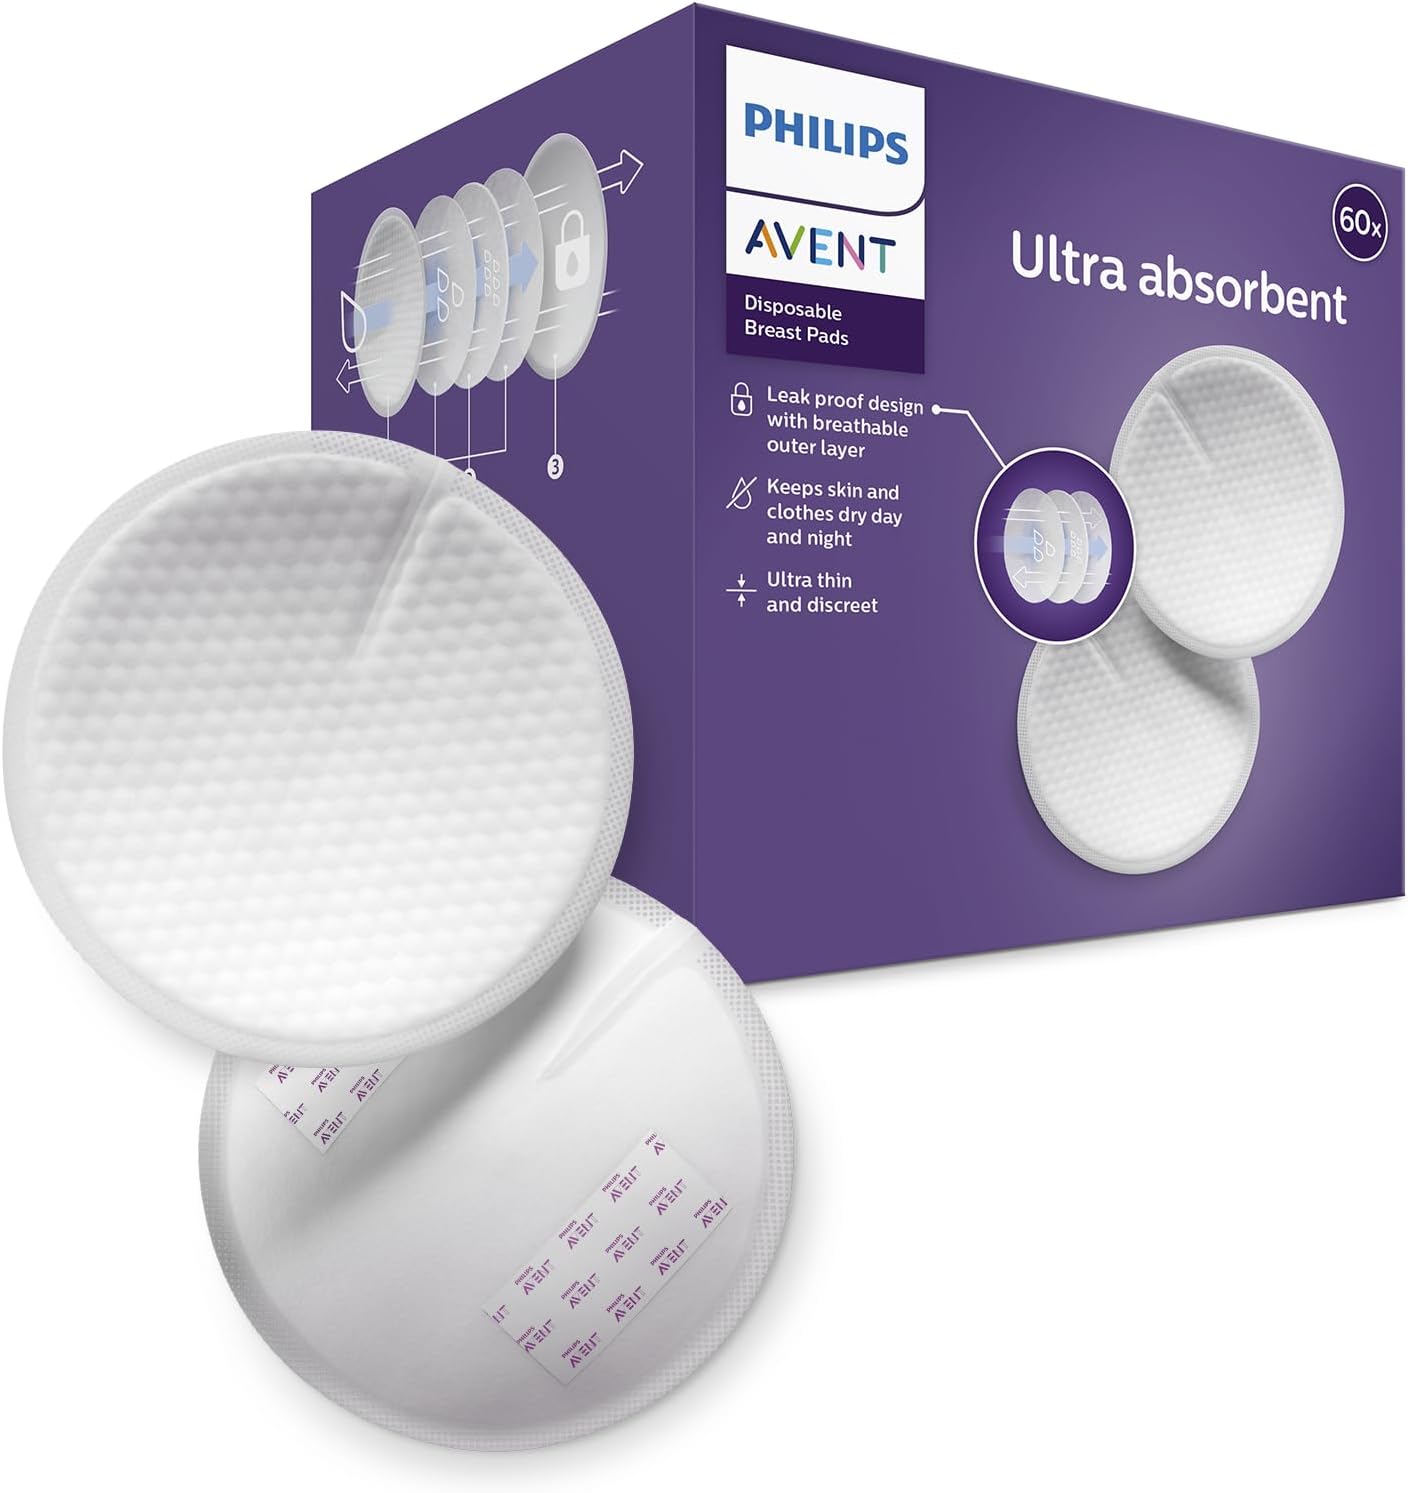 Philips AVENT Disposable Breast Pads, White, 60 pcs